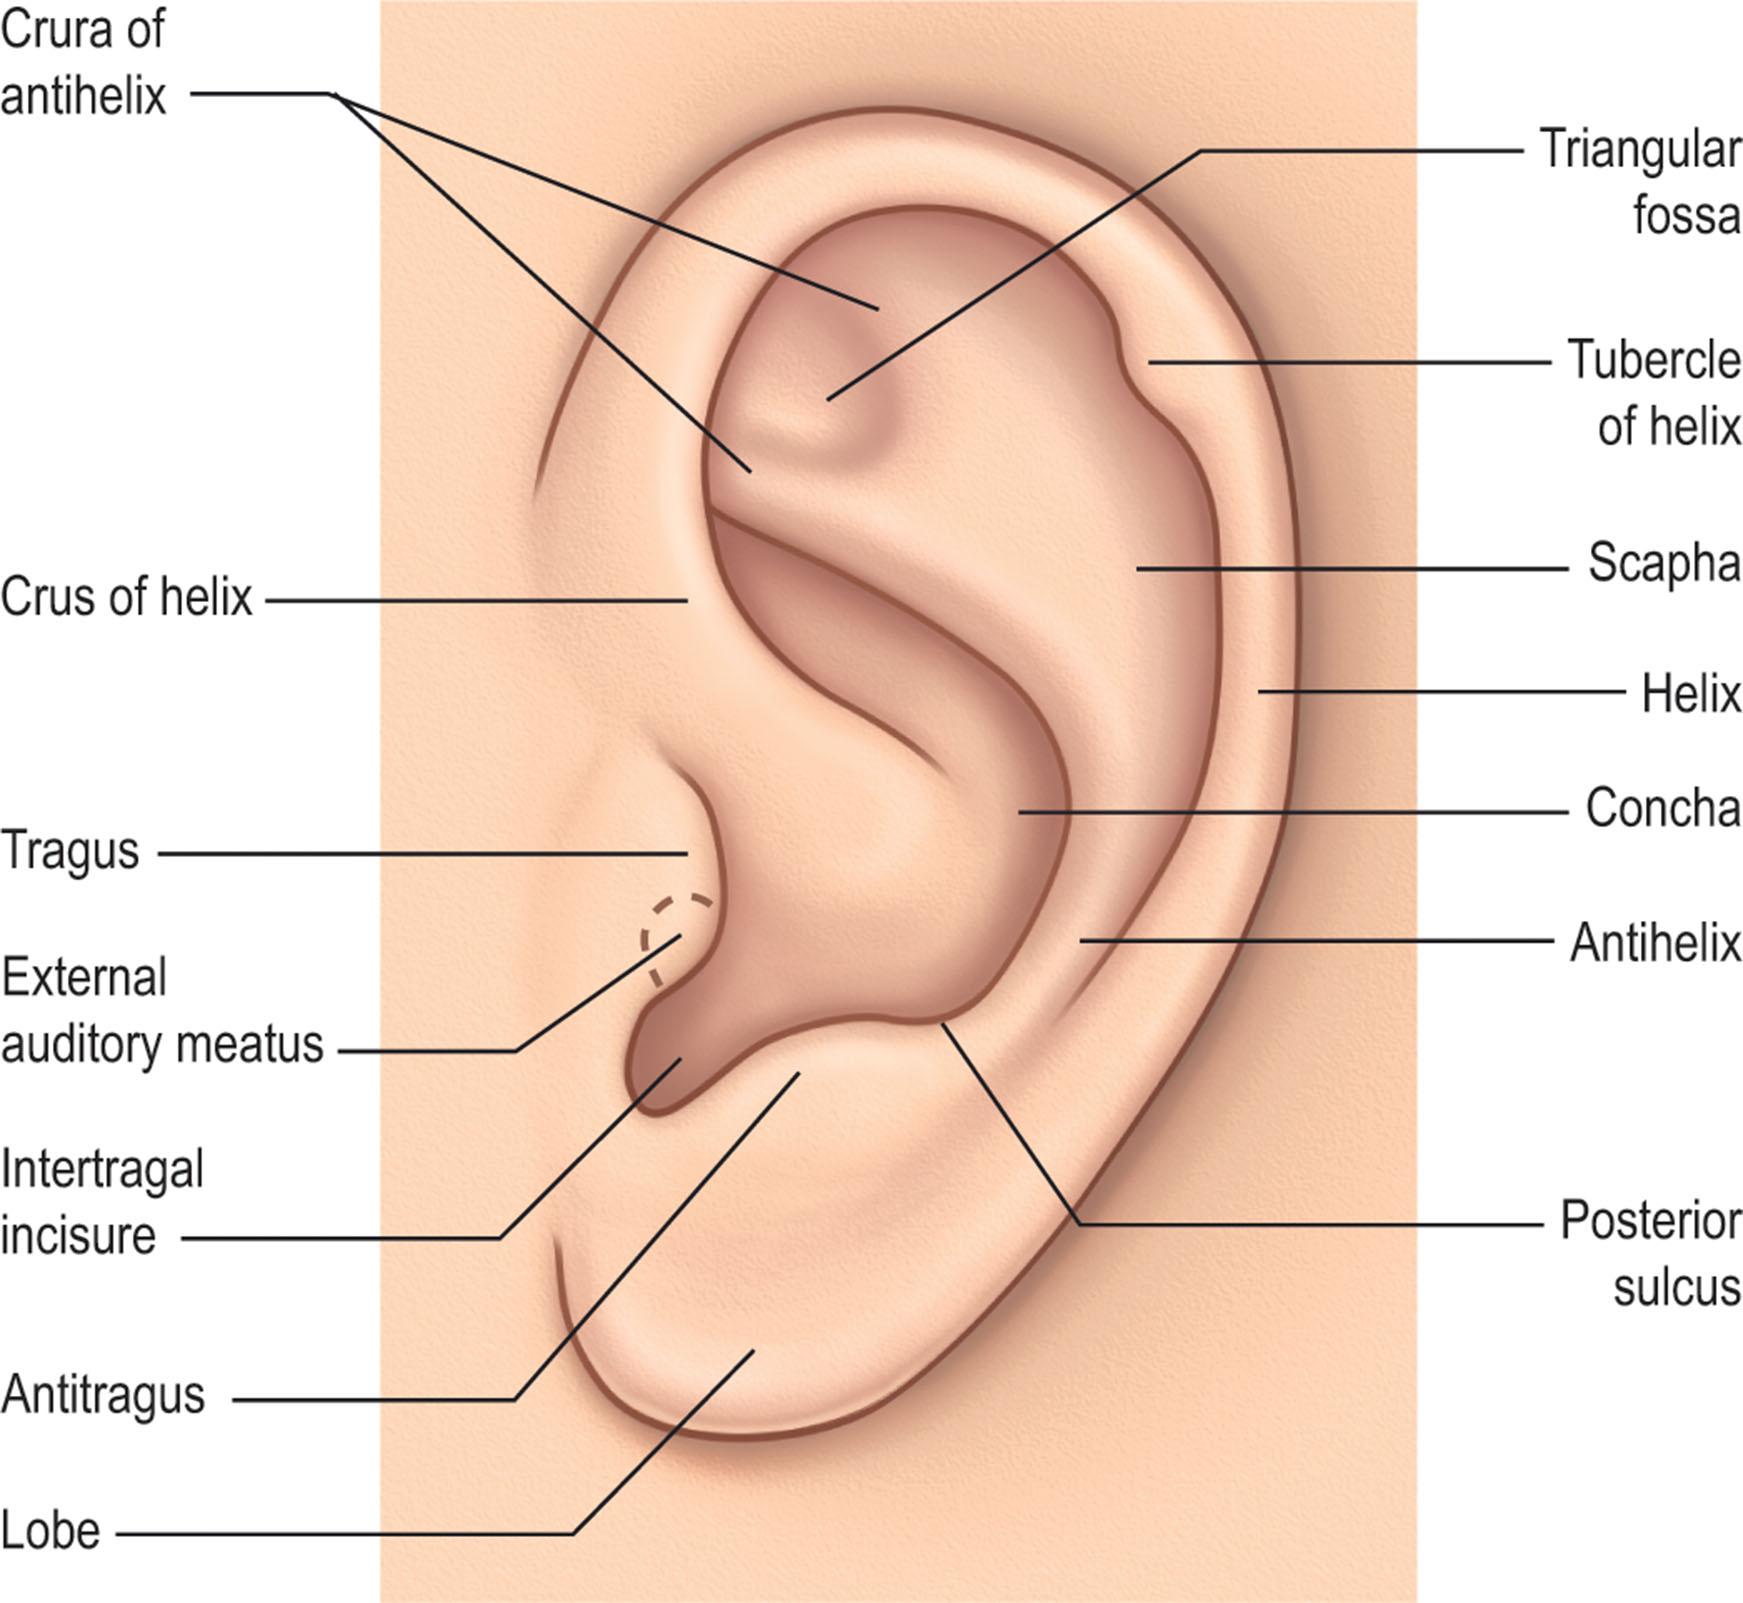 Figure 23.1, Anatomical structures of the ear. The tubercle of the helix is synonymous with Darwin's tubercle.